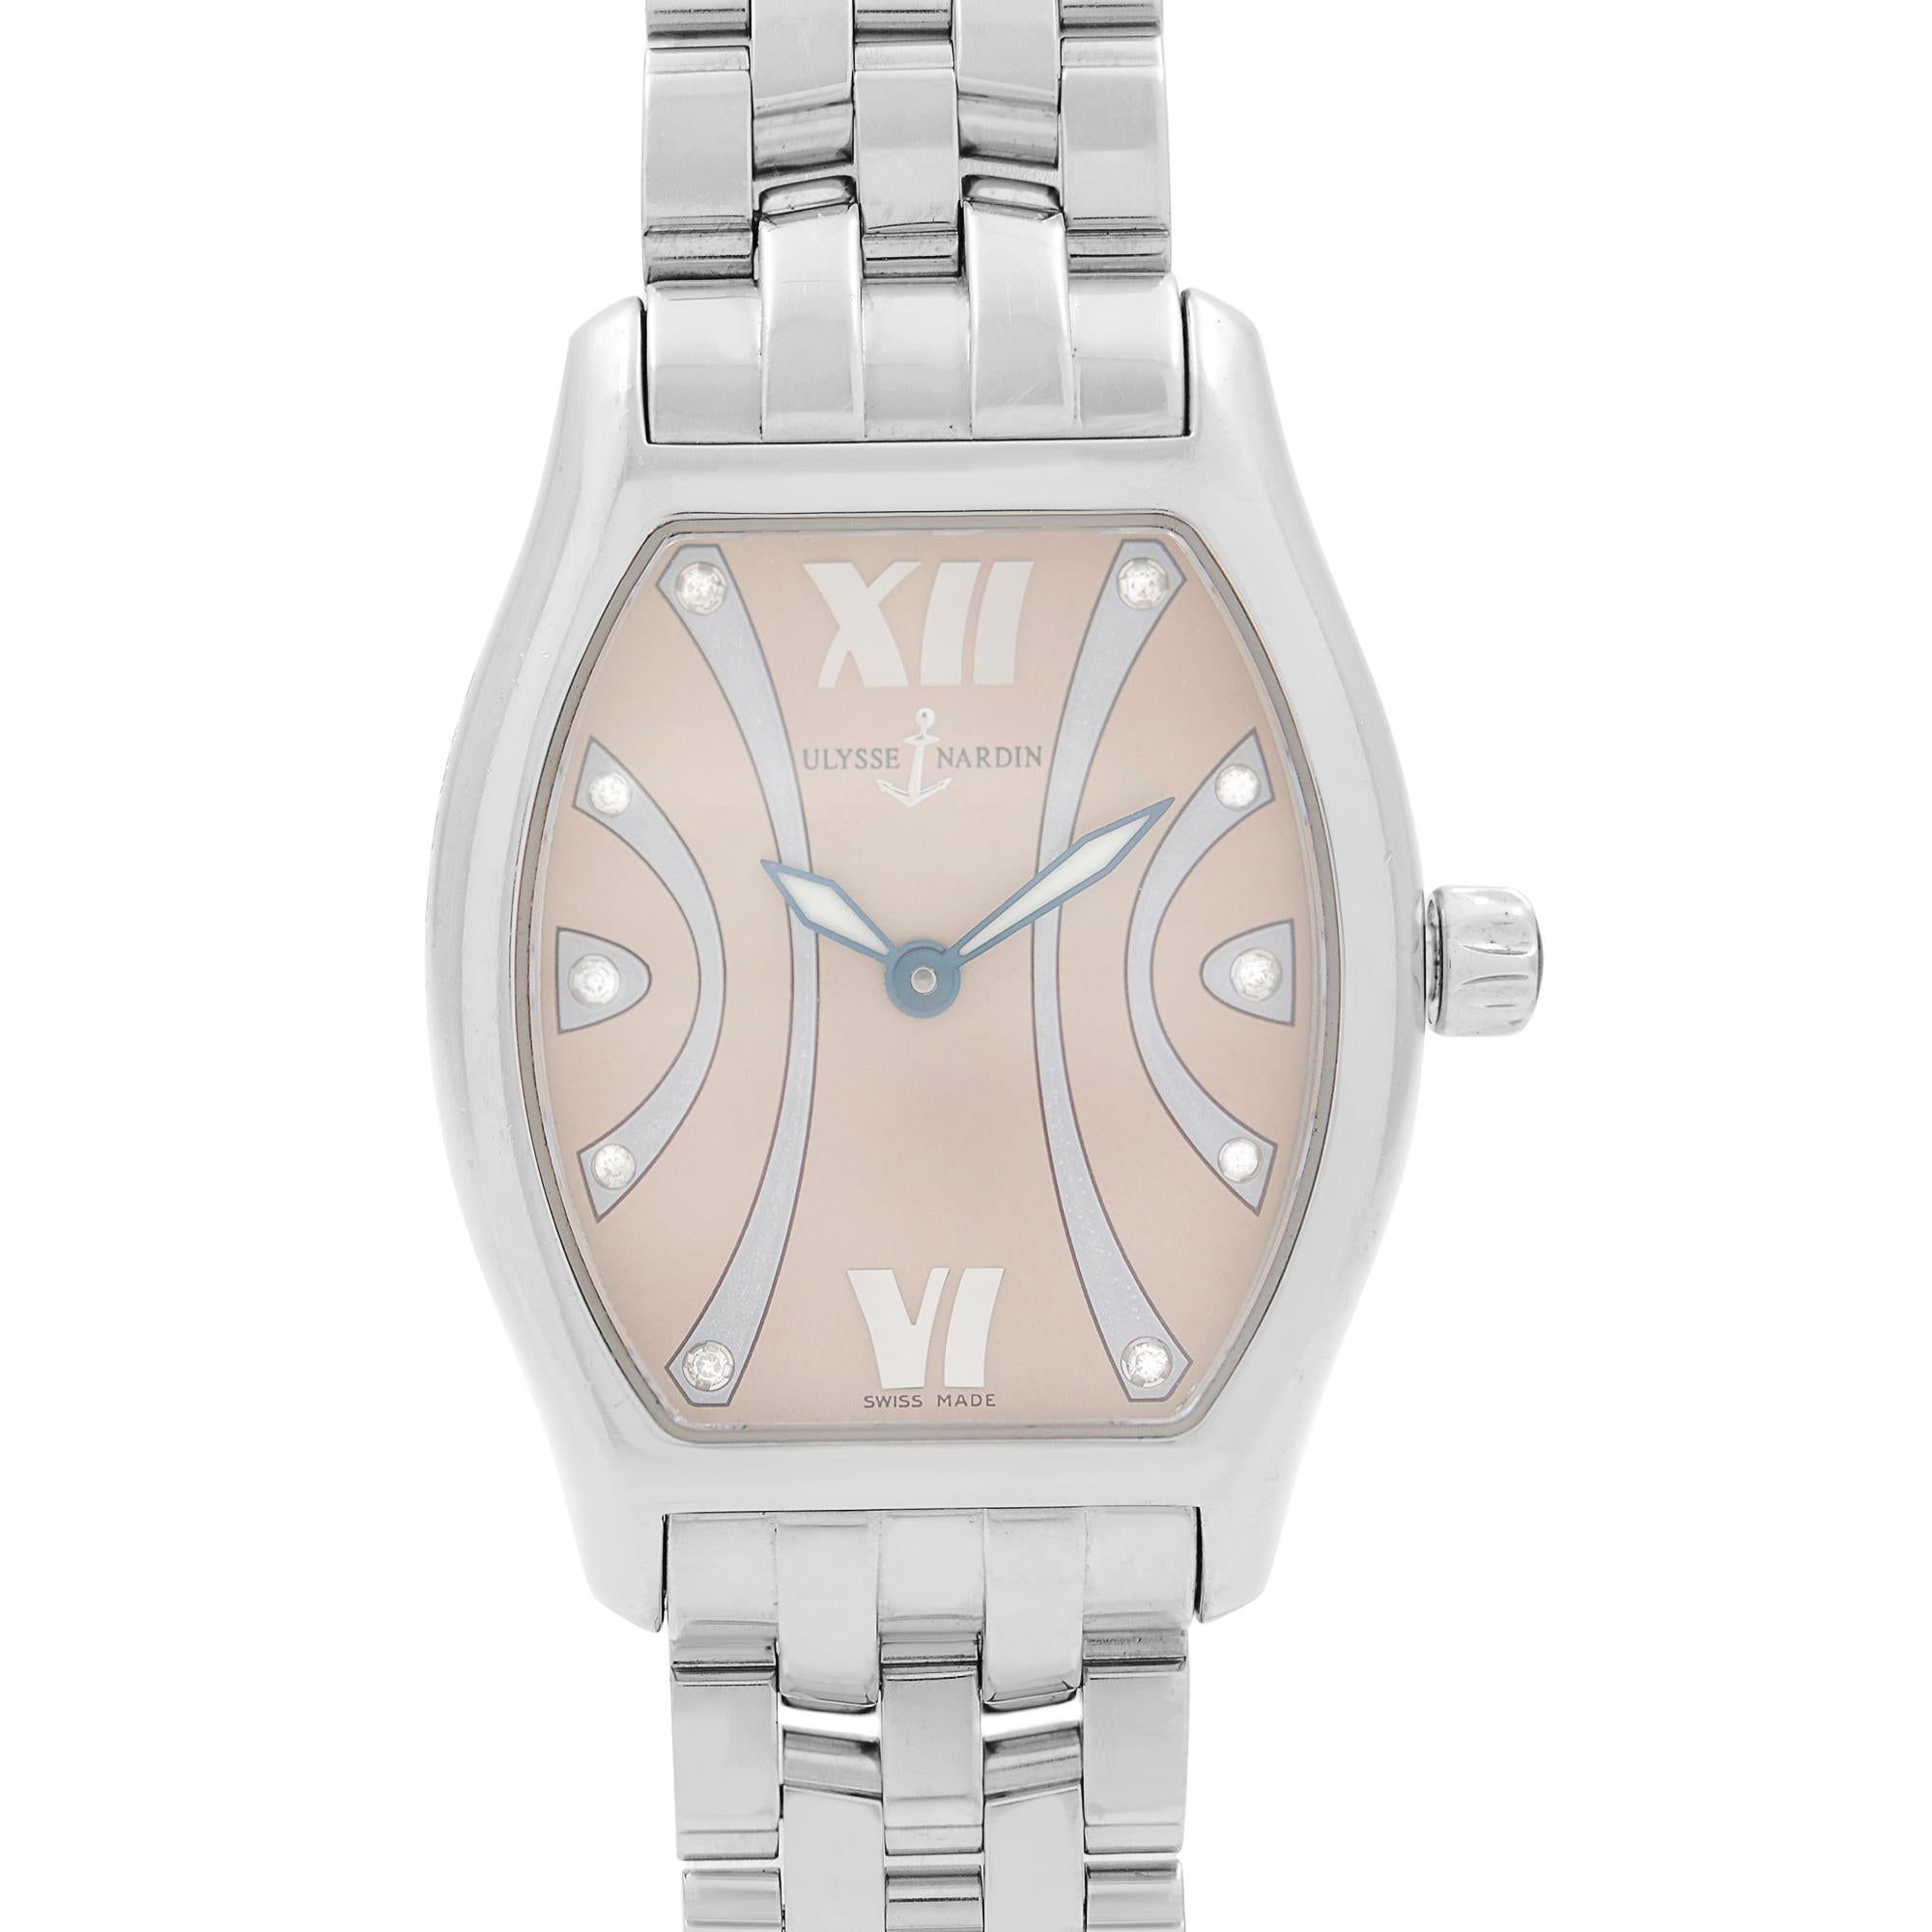 Pre Owned Ulysse Nardin Michelangelo Art Deco Style Steel Brown Diamond Dial Ladies Watch 103-48. Shows Some Wear This Beautiful Timepiece Features: Stainless Steel Case & Bracelet, Fixed Stainless Steel Bezel, Copper Dial with Luminous Silver-Tone